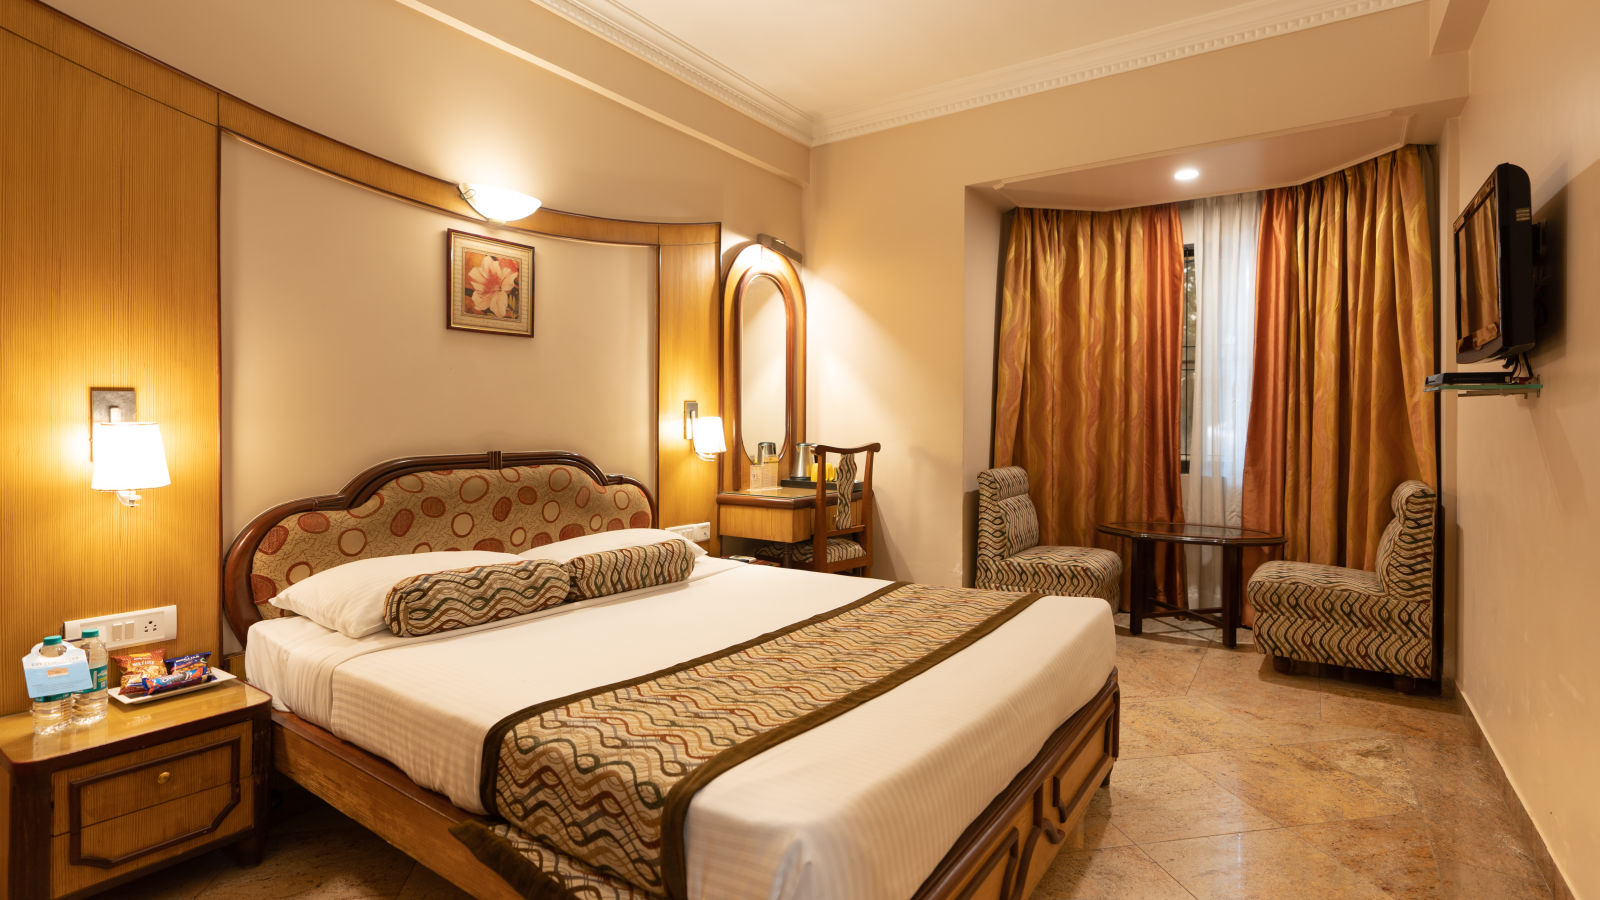 A room with a double bed at Hotel Pai Viceroy, Jayanagar